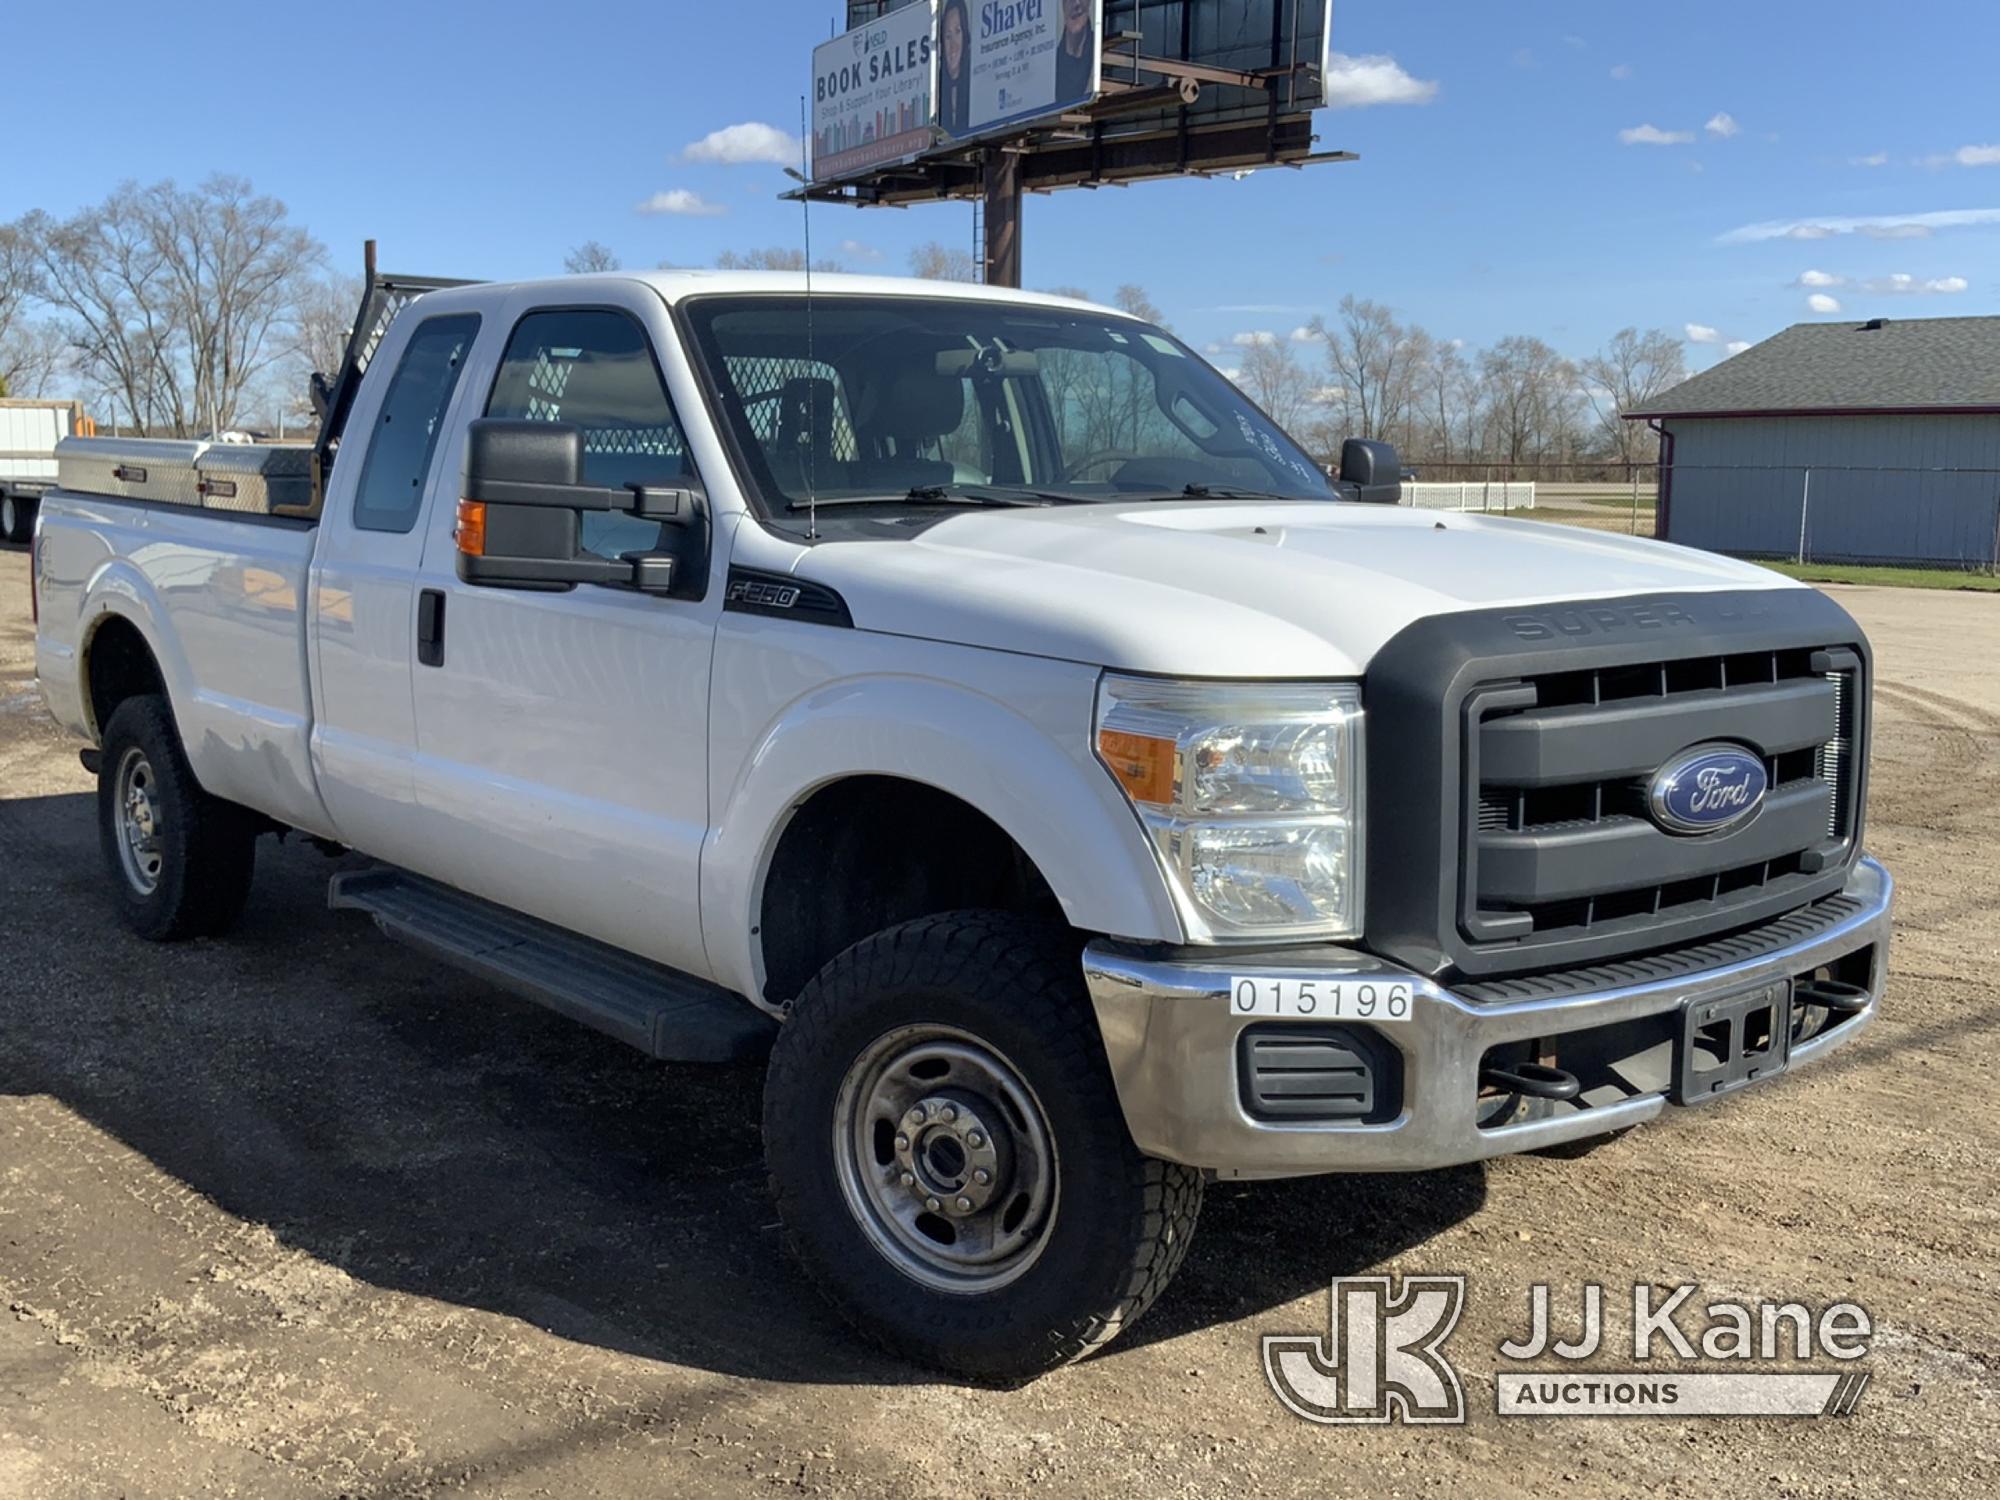 (South Beloit, IL) 2015 Ford F250 4x4 Extended-Cab Pickup Truck Runs & Moves